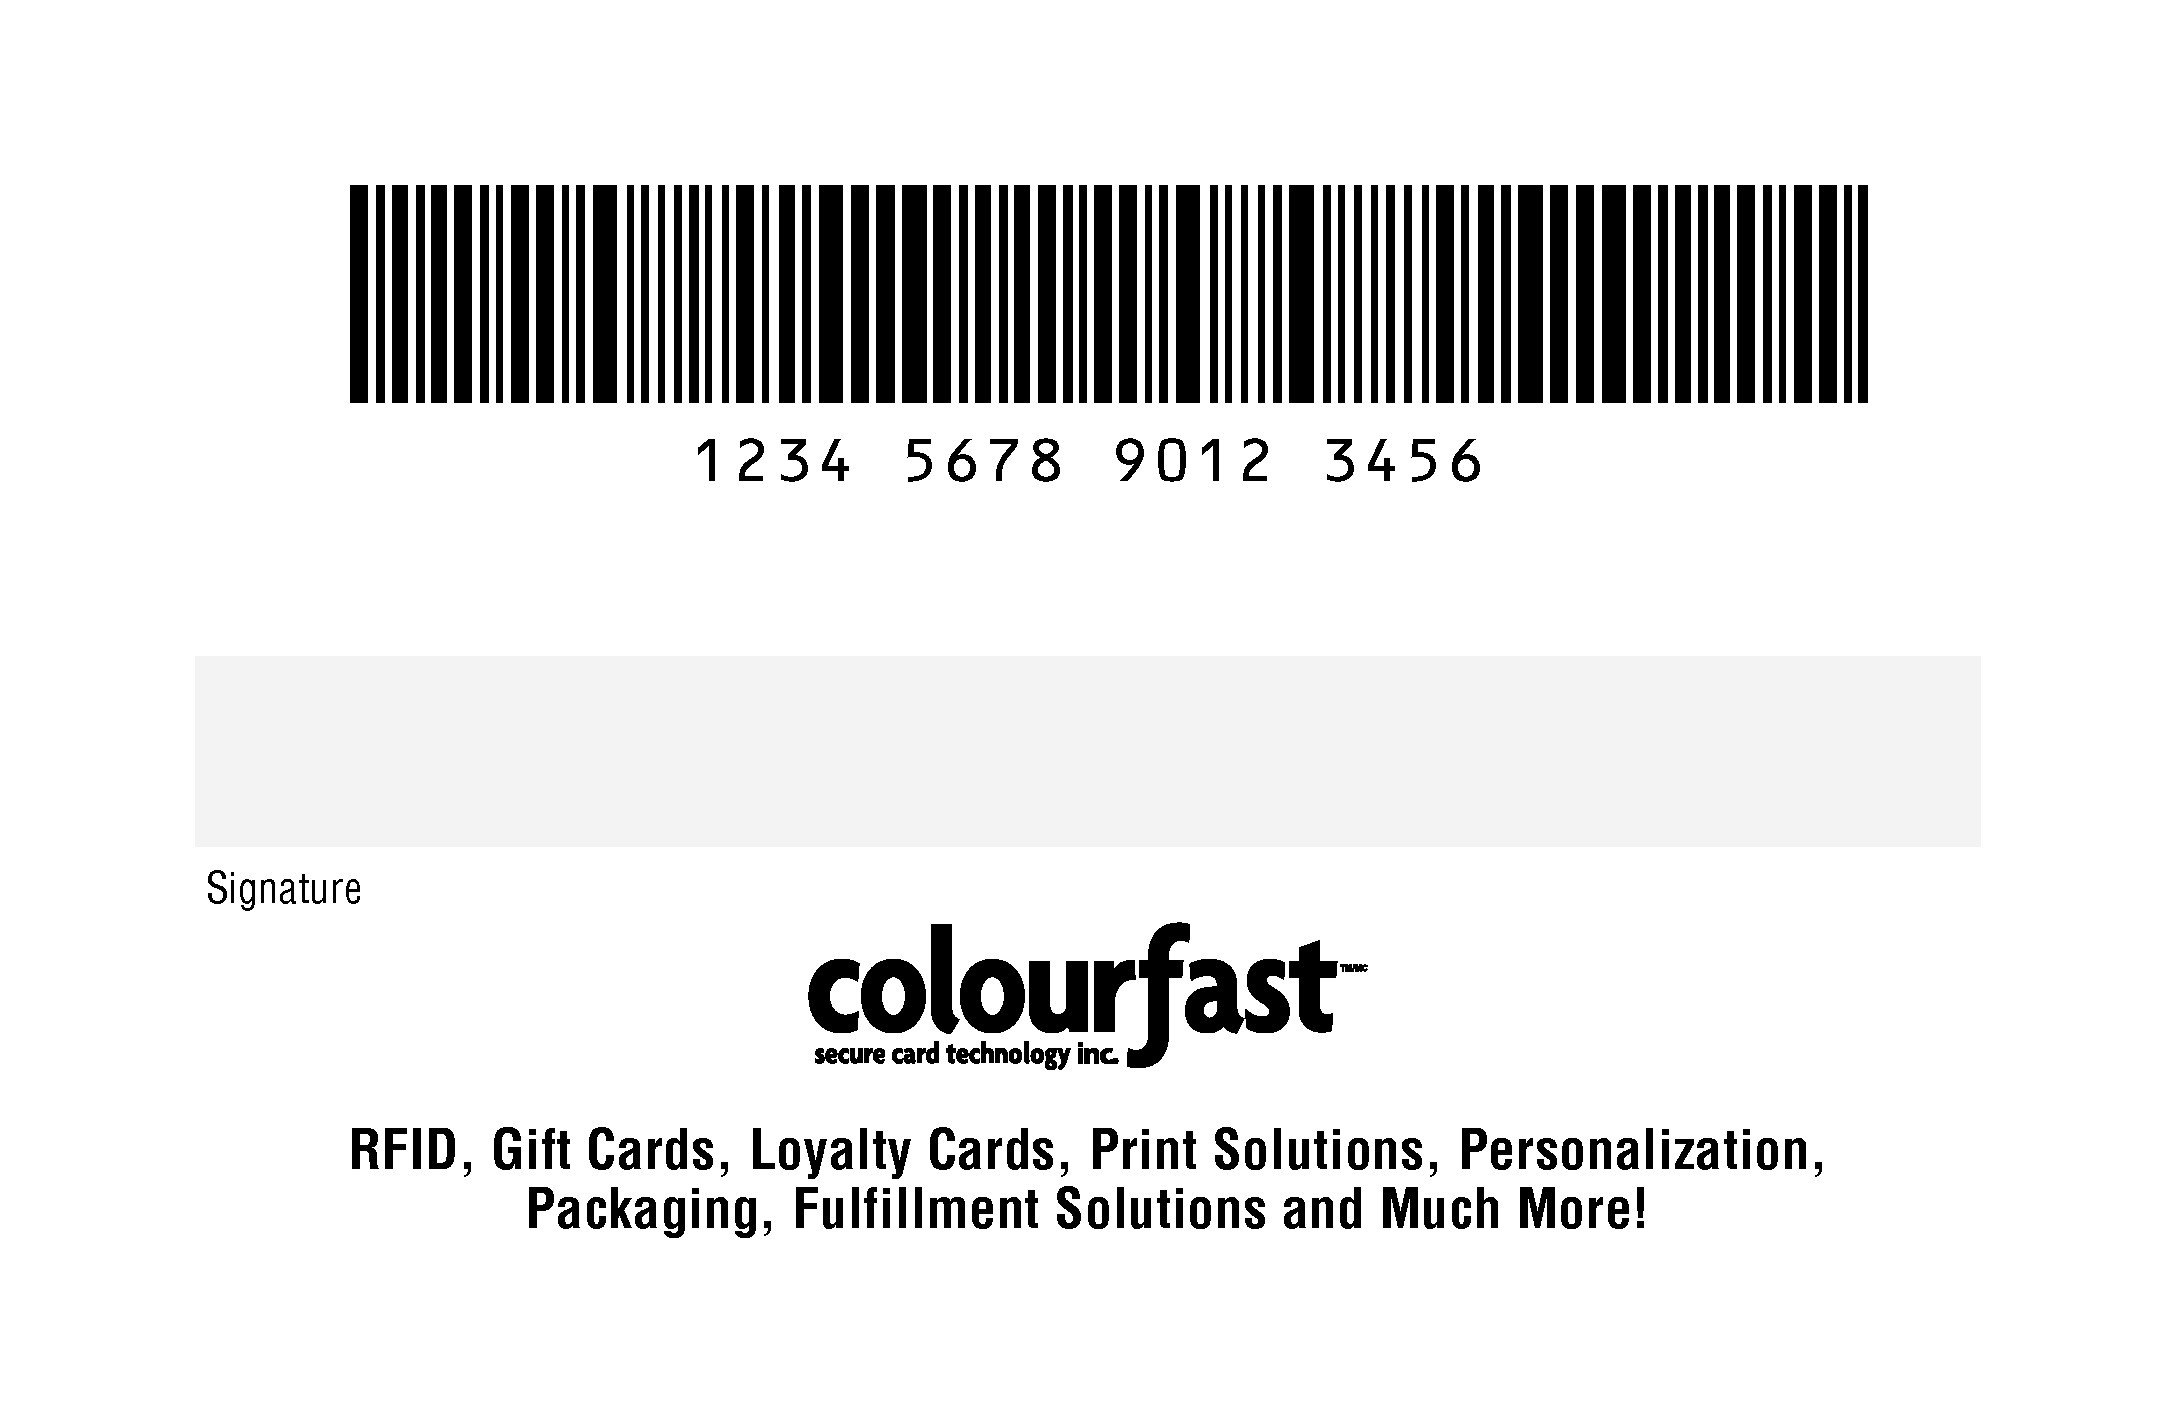 Image of Variable Barcode, Human-readable number, Signature Panel